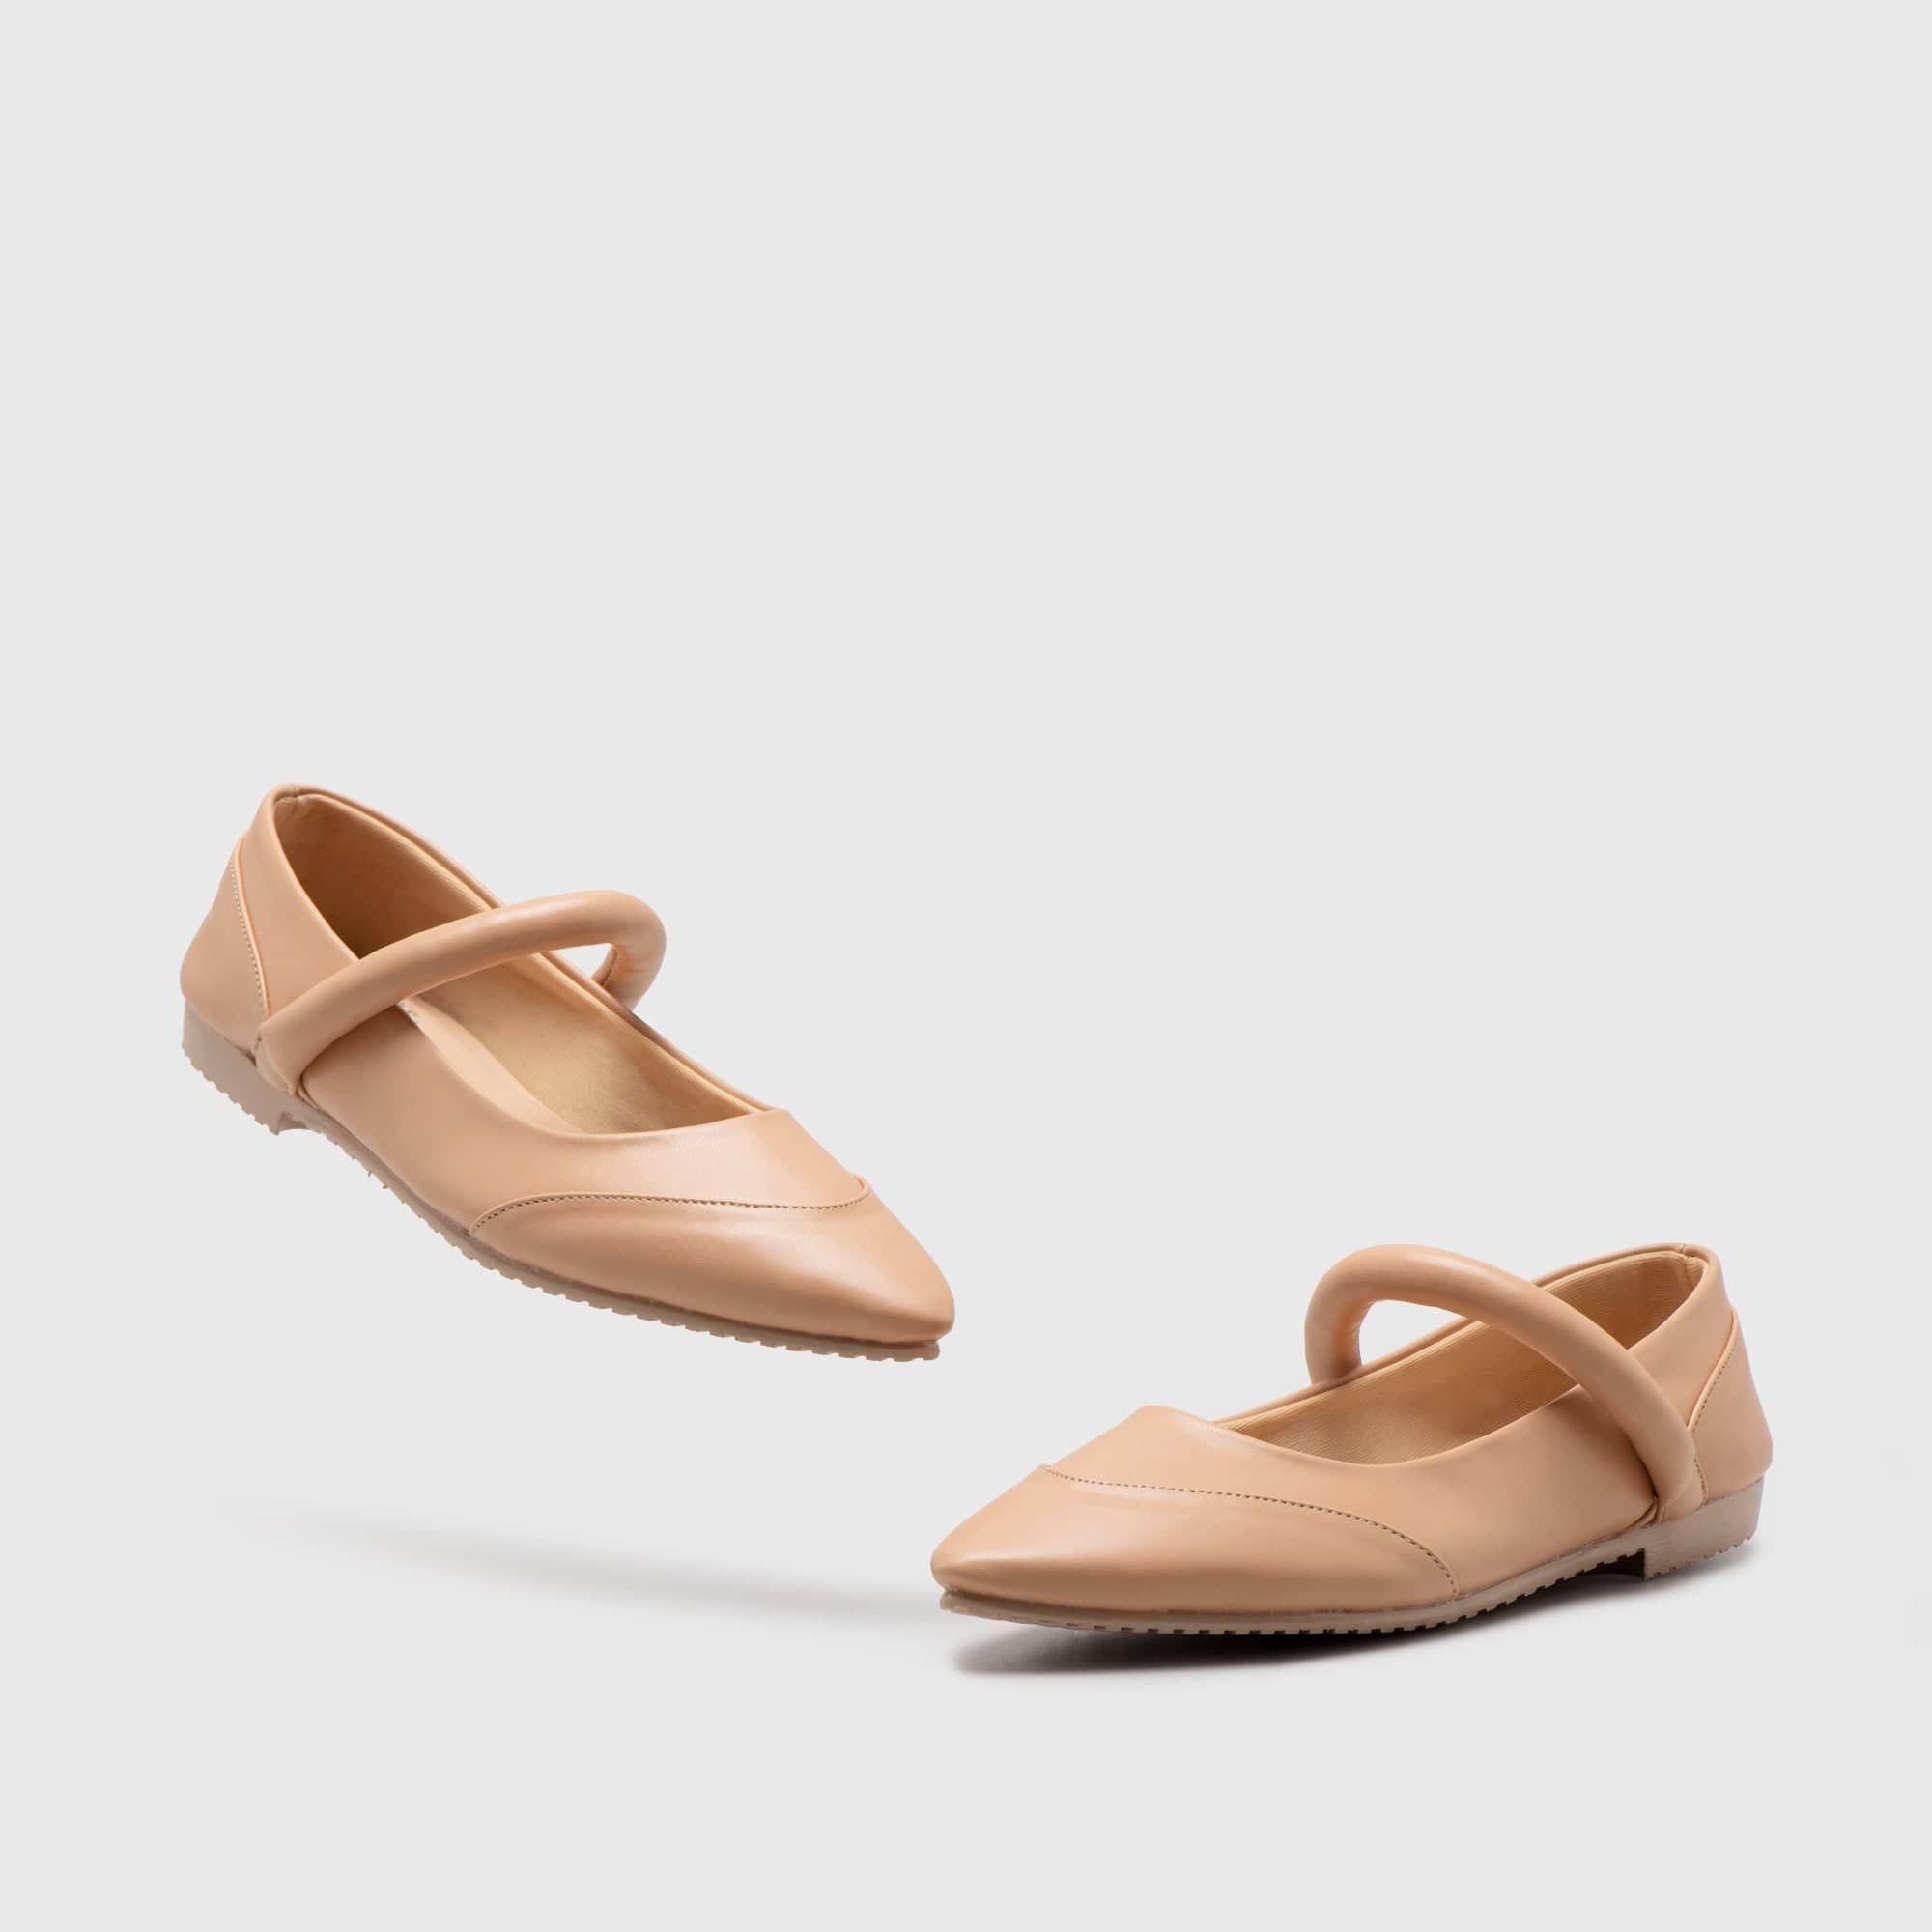 Adorable Projects Official Ballet Flatshoes Tiana Flat Shoes Nude